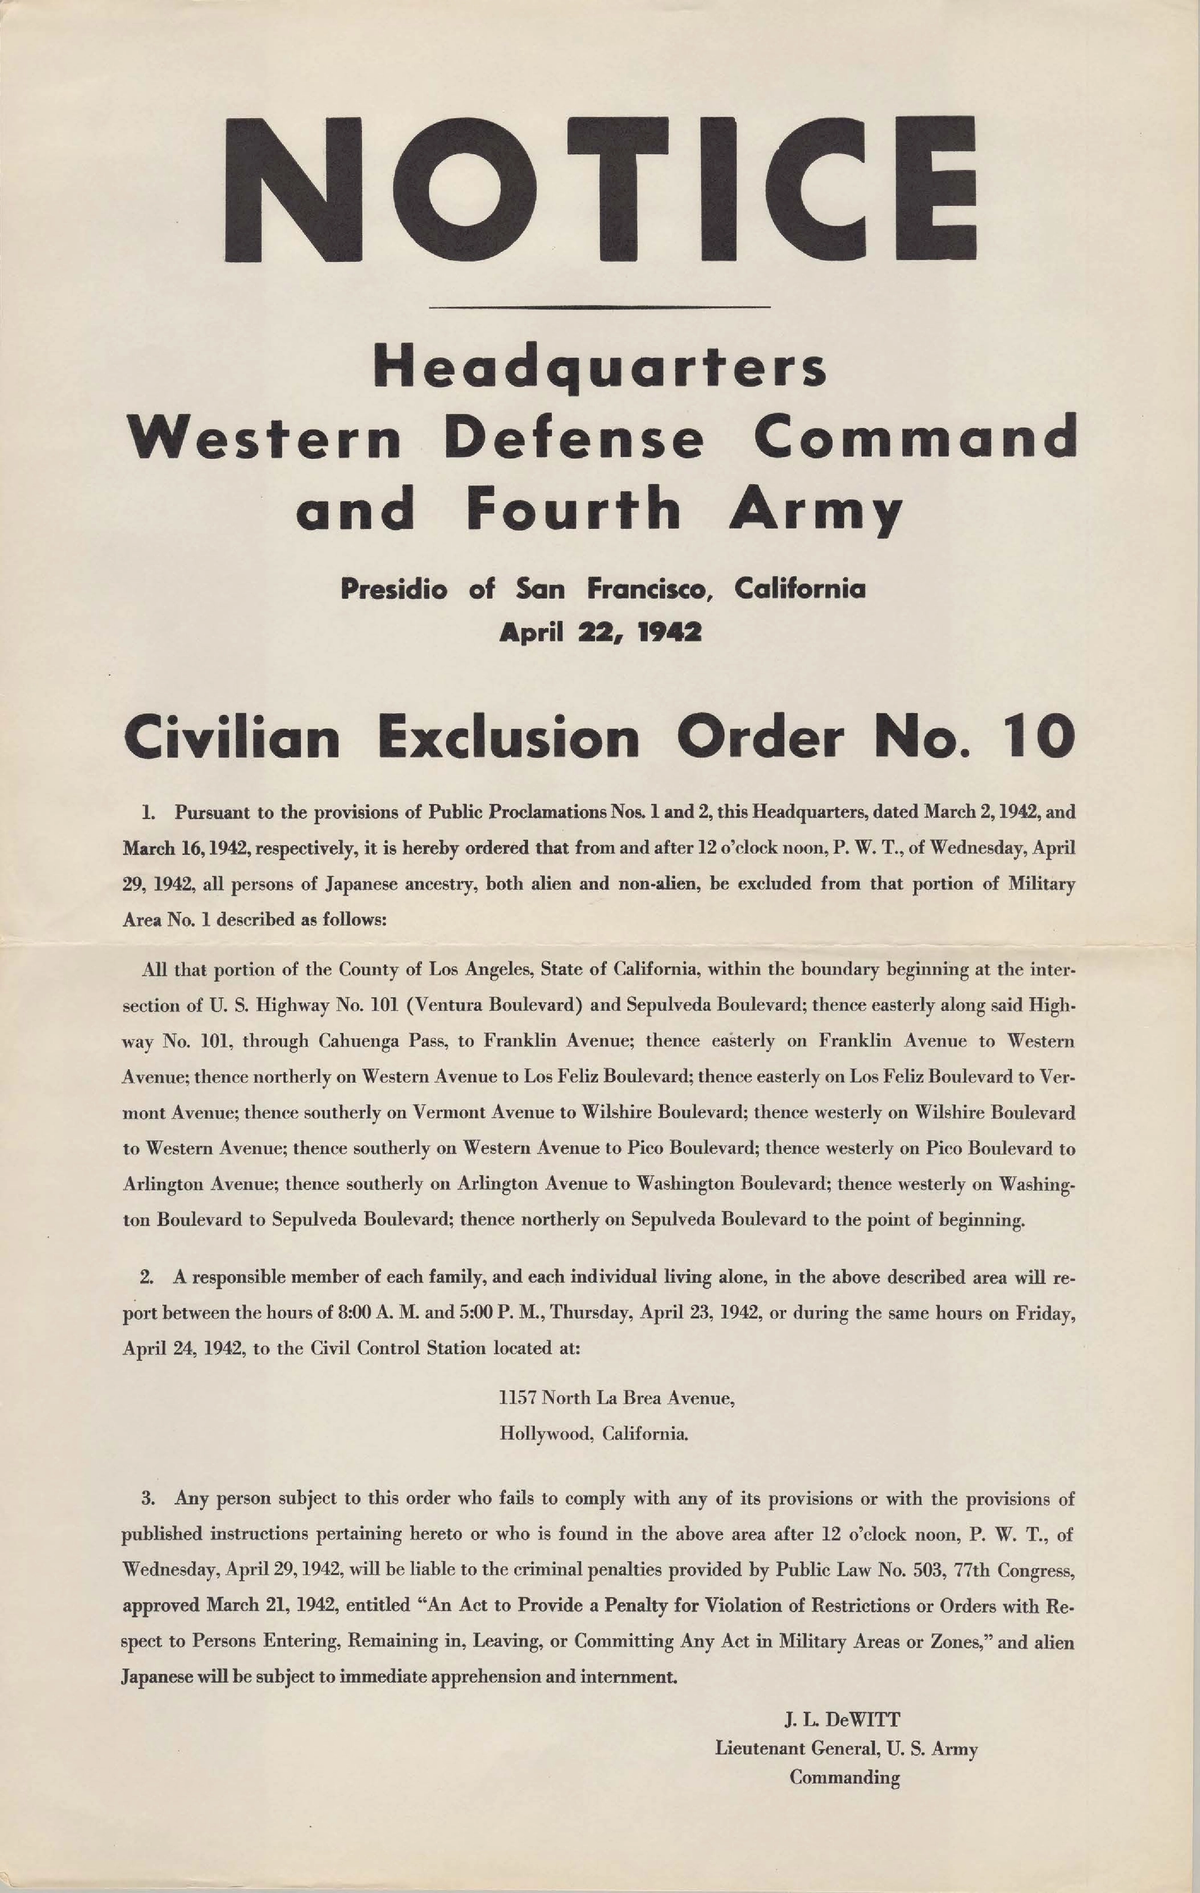 A broadside instructs Japanese American residents in Los Angeles County, Hollywood city area, state of California, that they will be excluded from the area by April 29, 1942, and to prepare for evacuation by that date to a Civil Control Office in the area. Residents failing to comply with the Civil Exclusion Order would be subject to criminal penalties and immediately apprehended and interned. It also instructs “responsible family members” to report to the Civil Control Office on April 23 or 24 for further instruction.